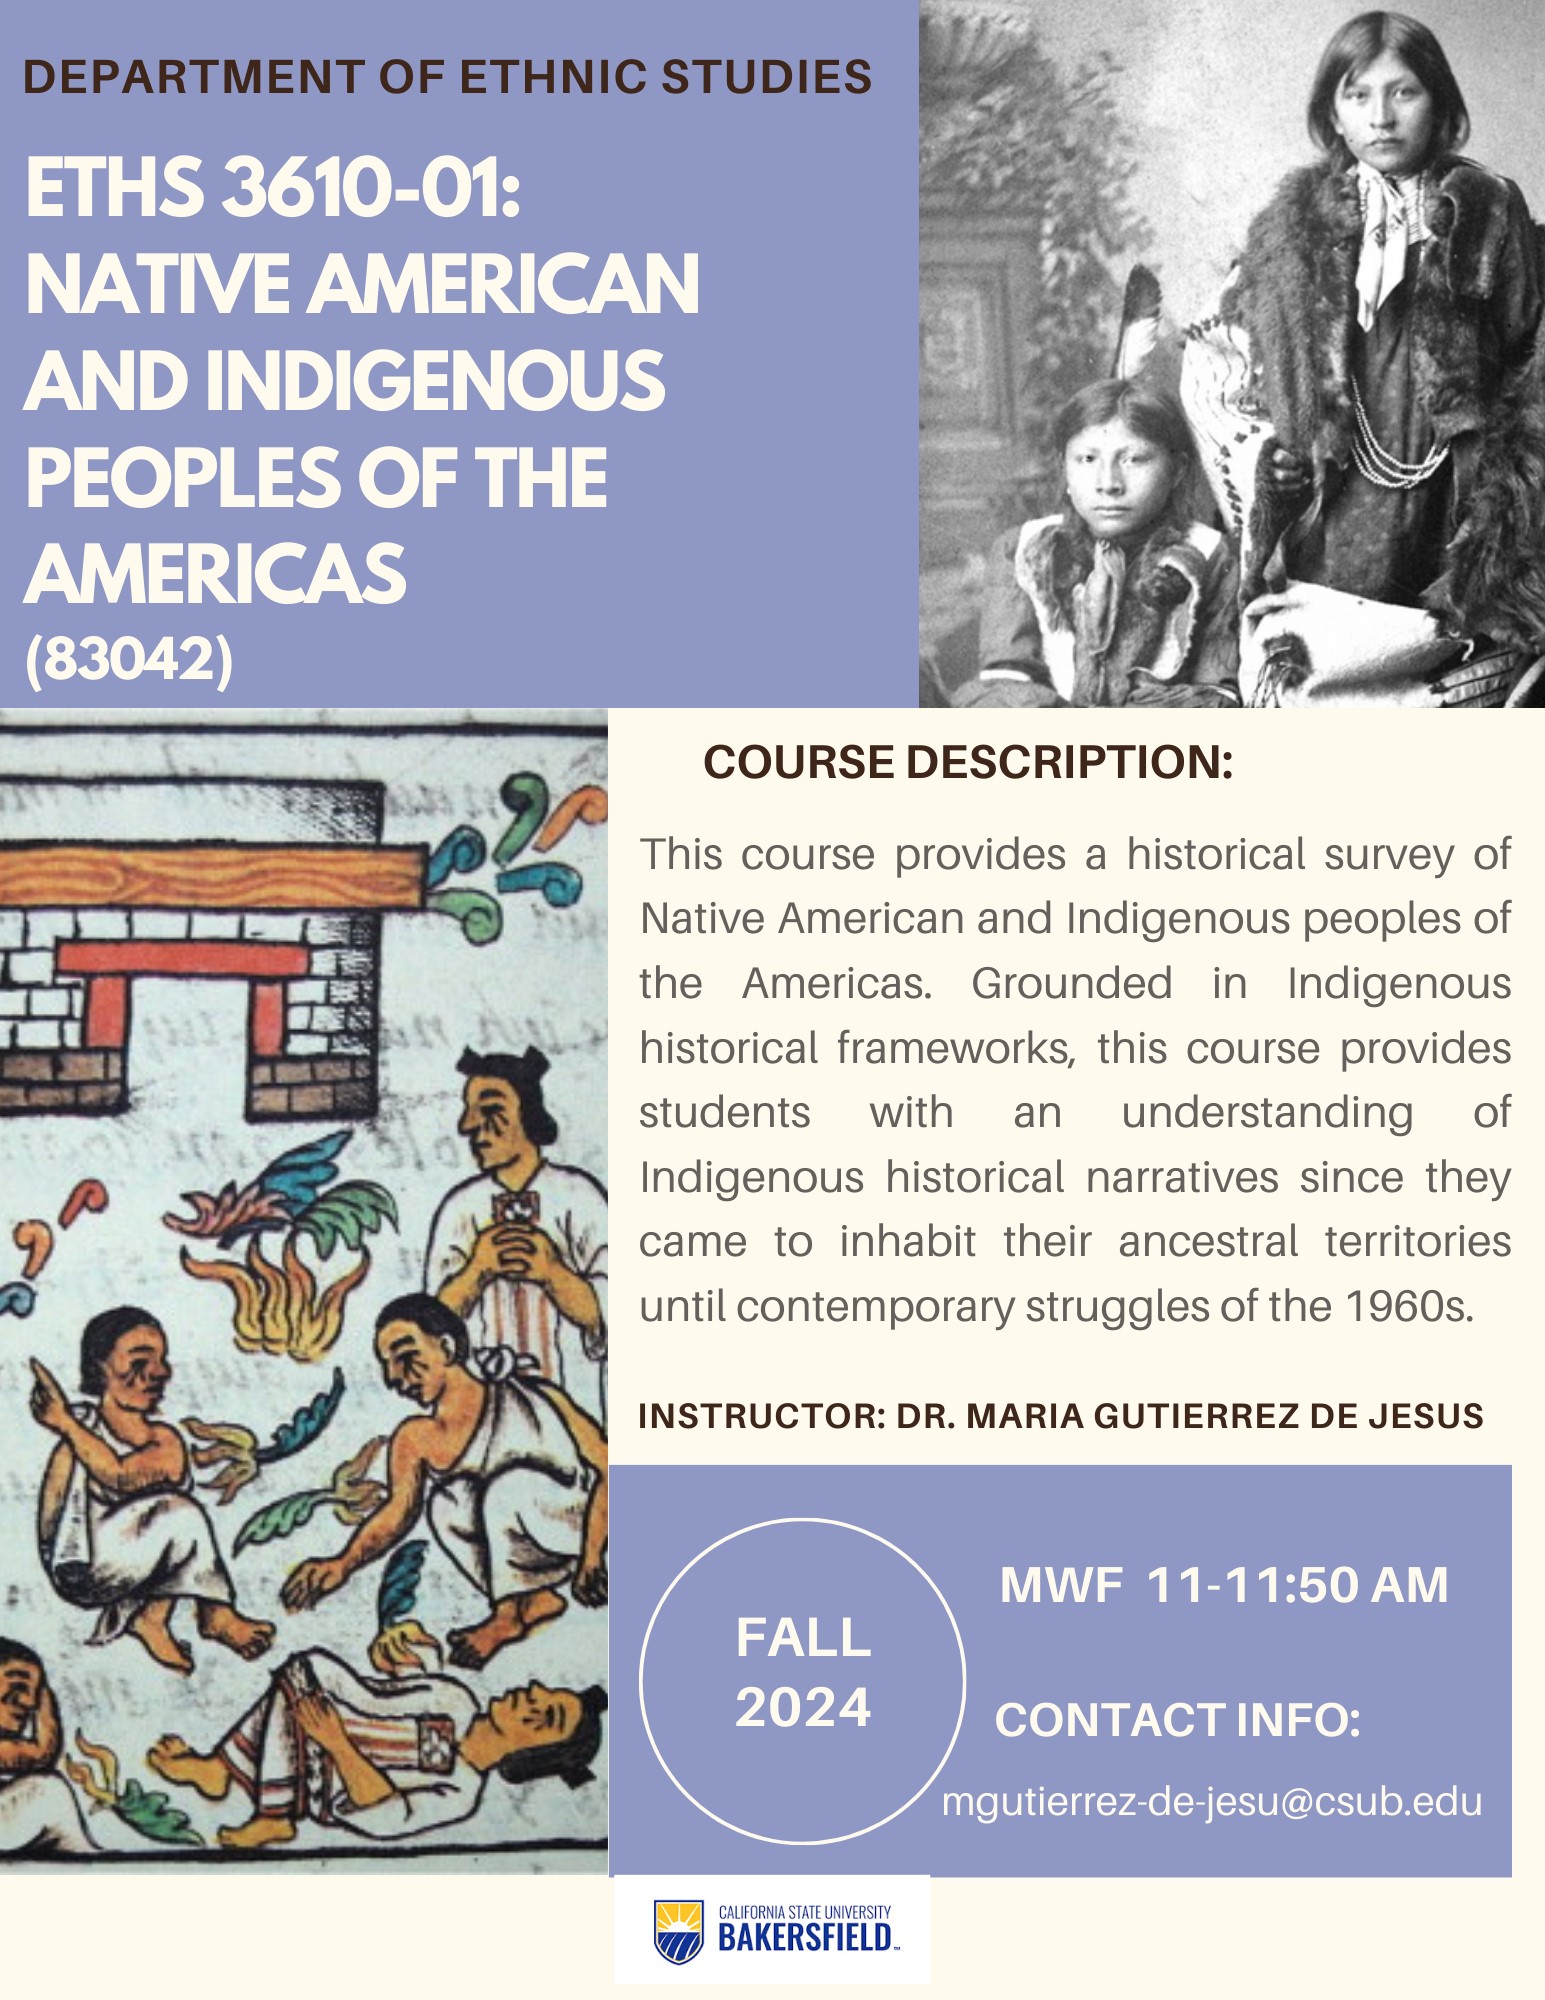 ETHS 3610 - Native American and Indigenous Peoples of the Americas